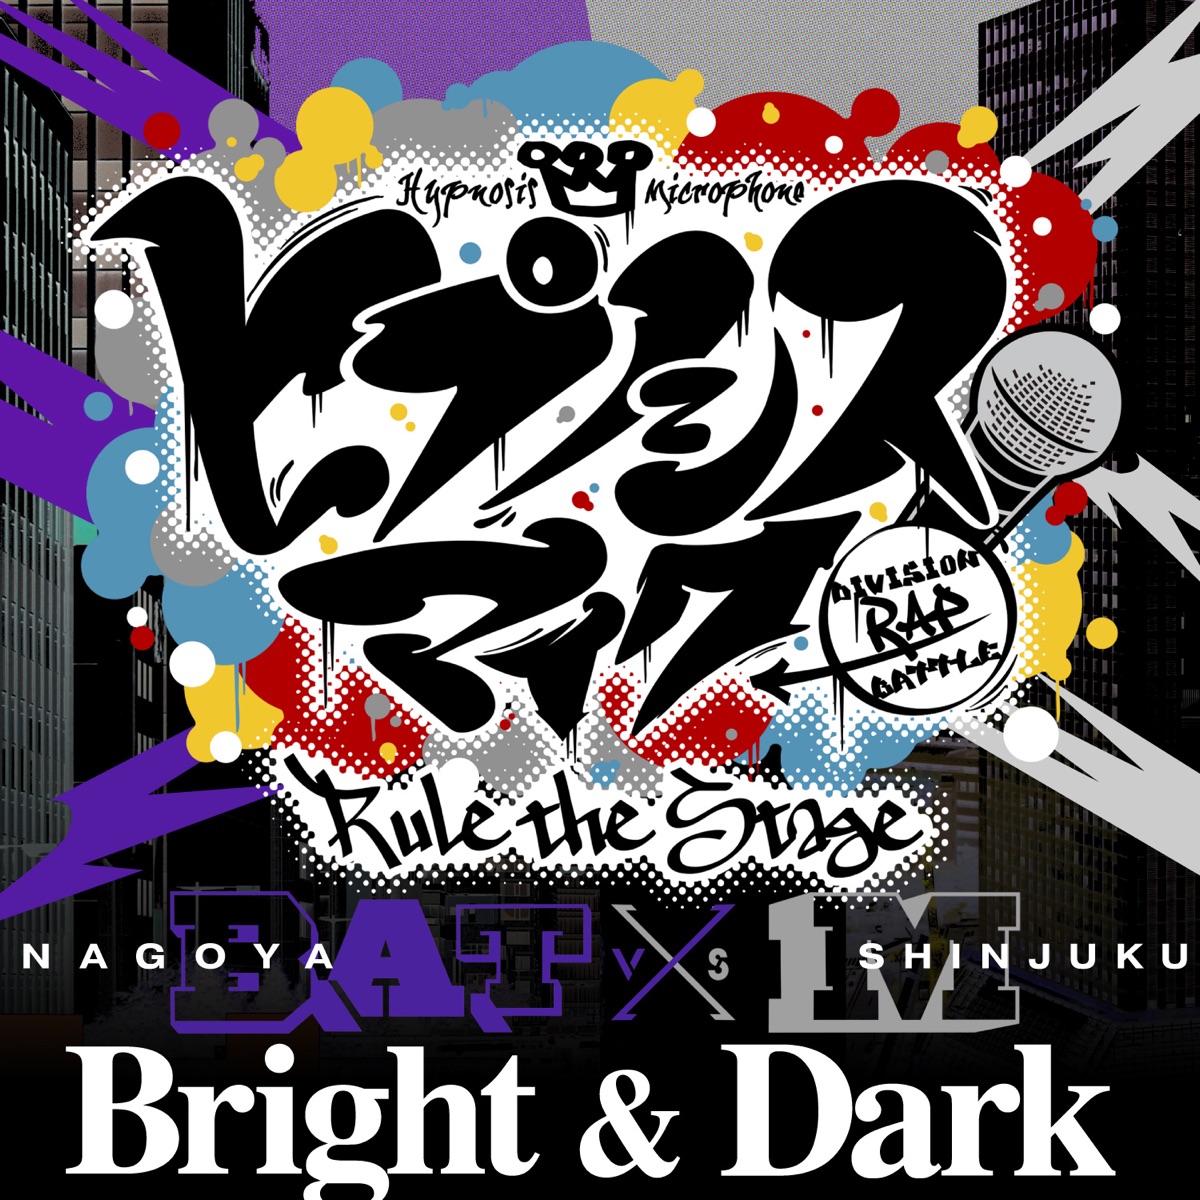 Cover art for『Hypnosis Mic -D.R.B- Rule the Stage (B.A.T vs M All Cast) - Bright & Dark』from the release『Bright & Dark』